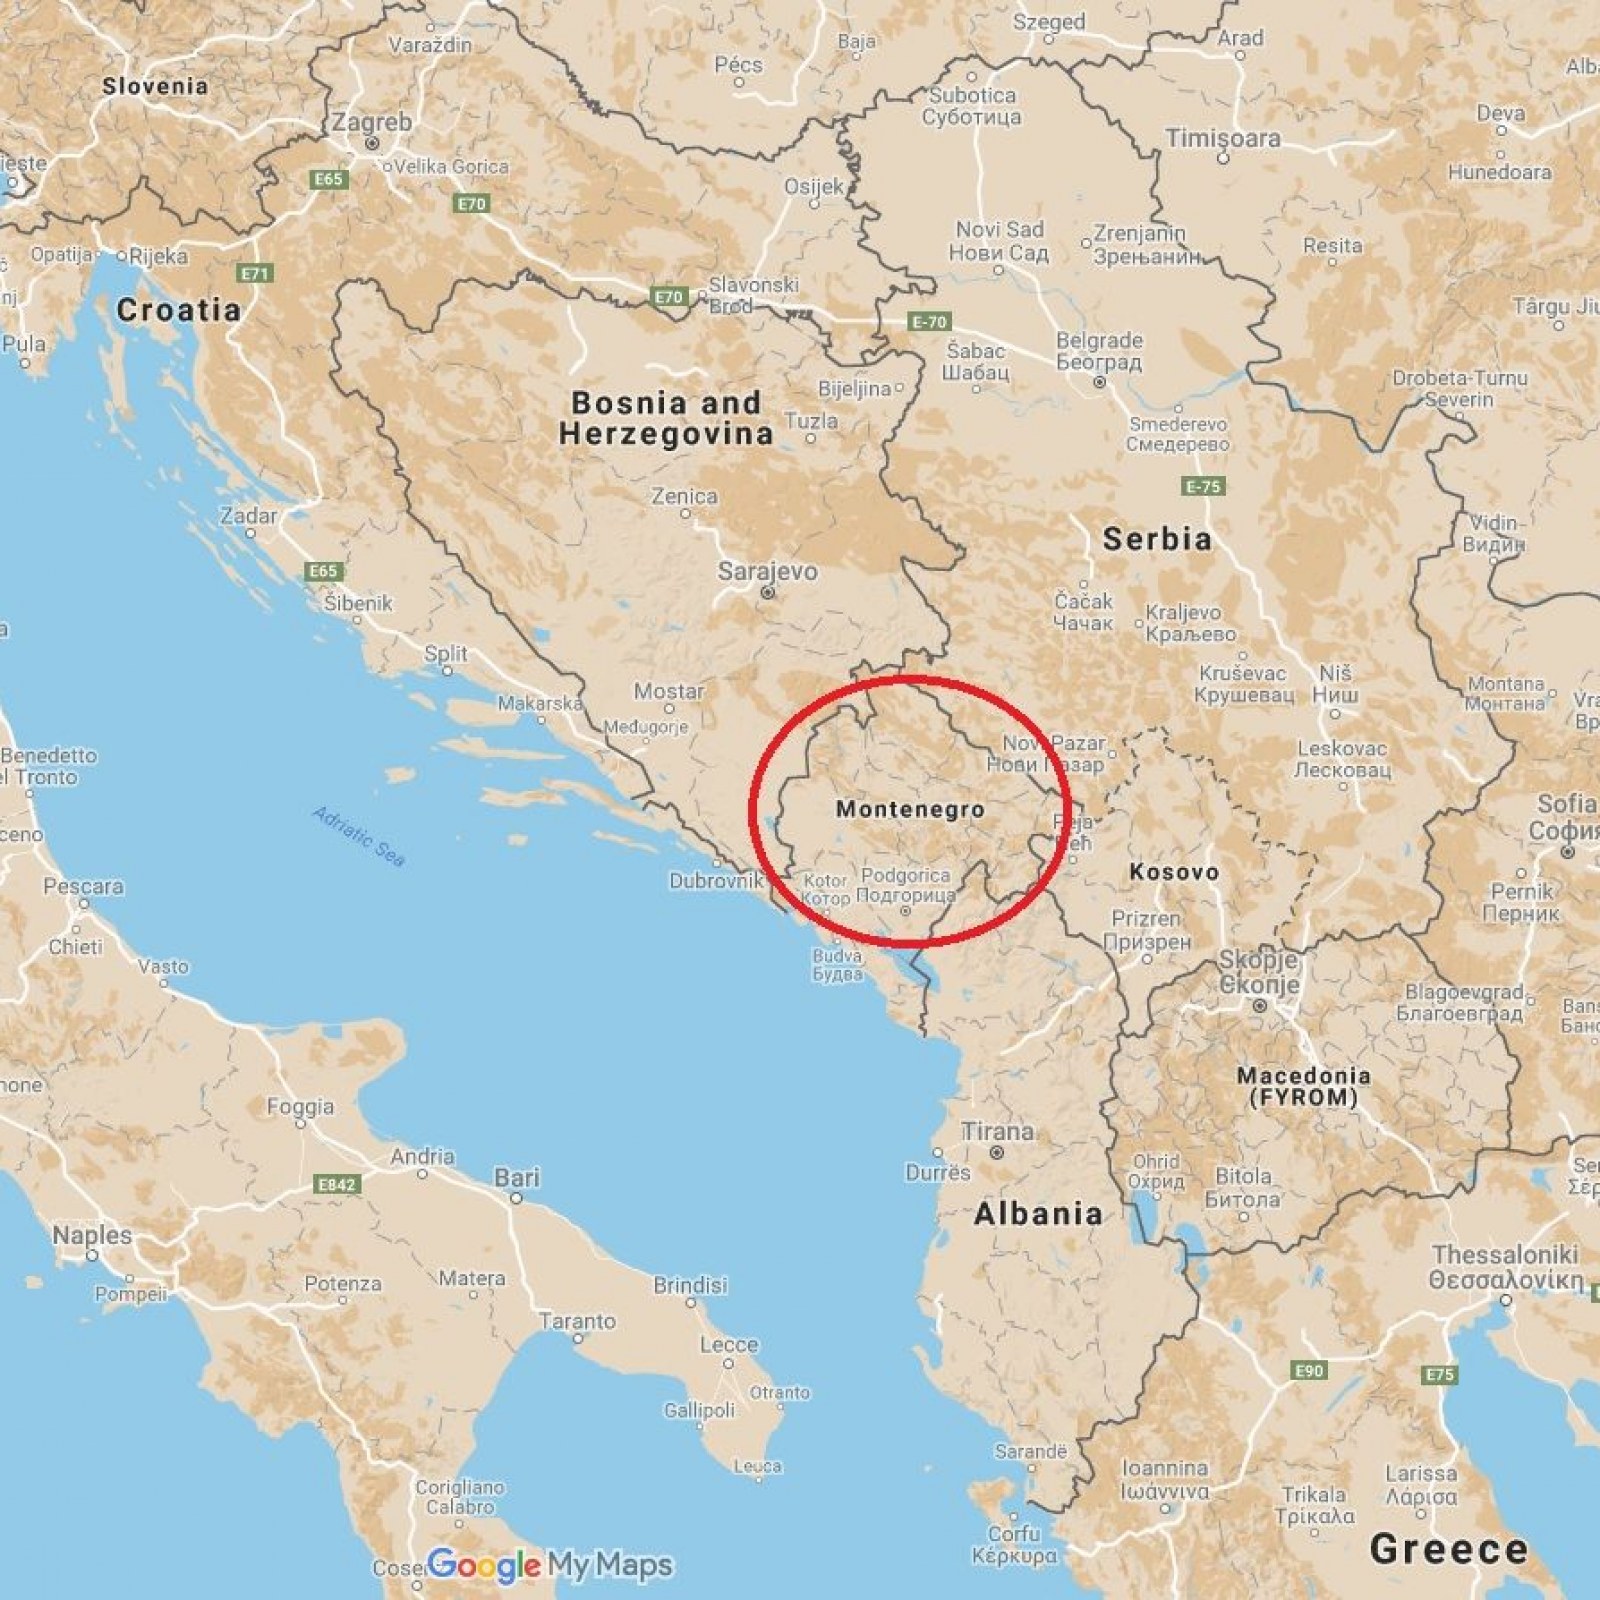 The location of Montenegro circled in red on the map with other neighboring European countries